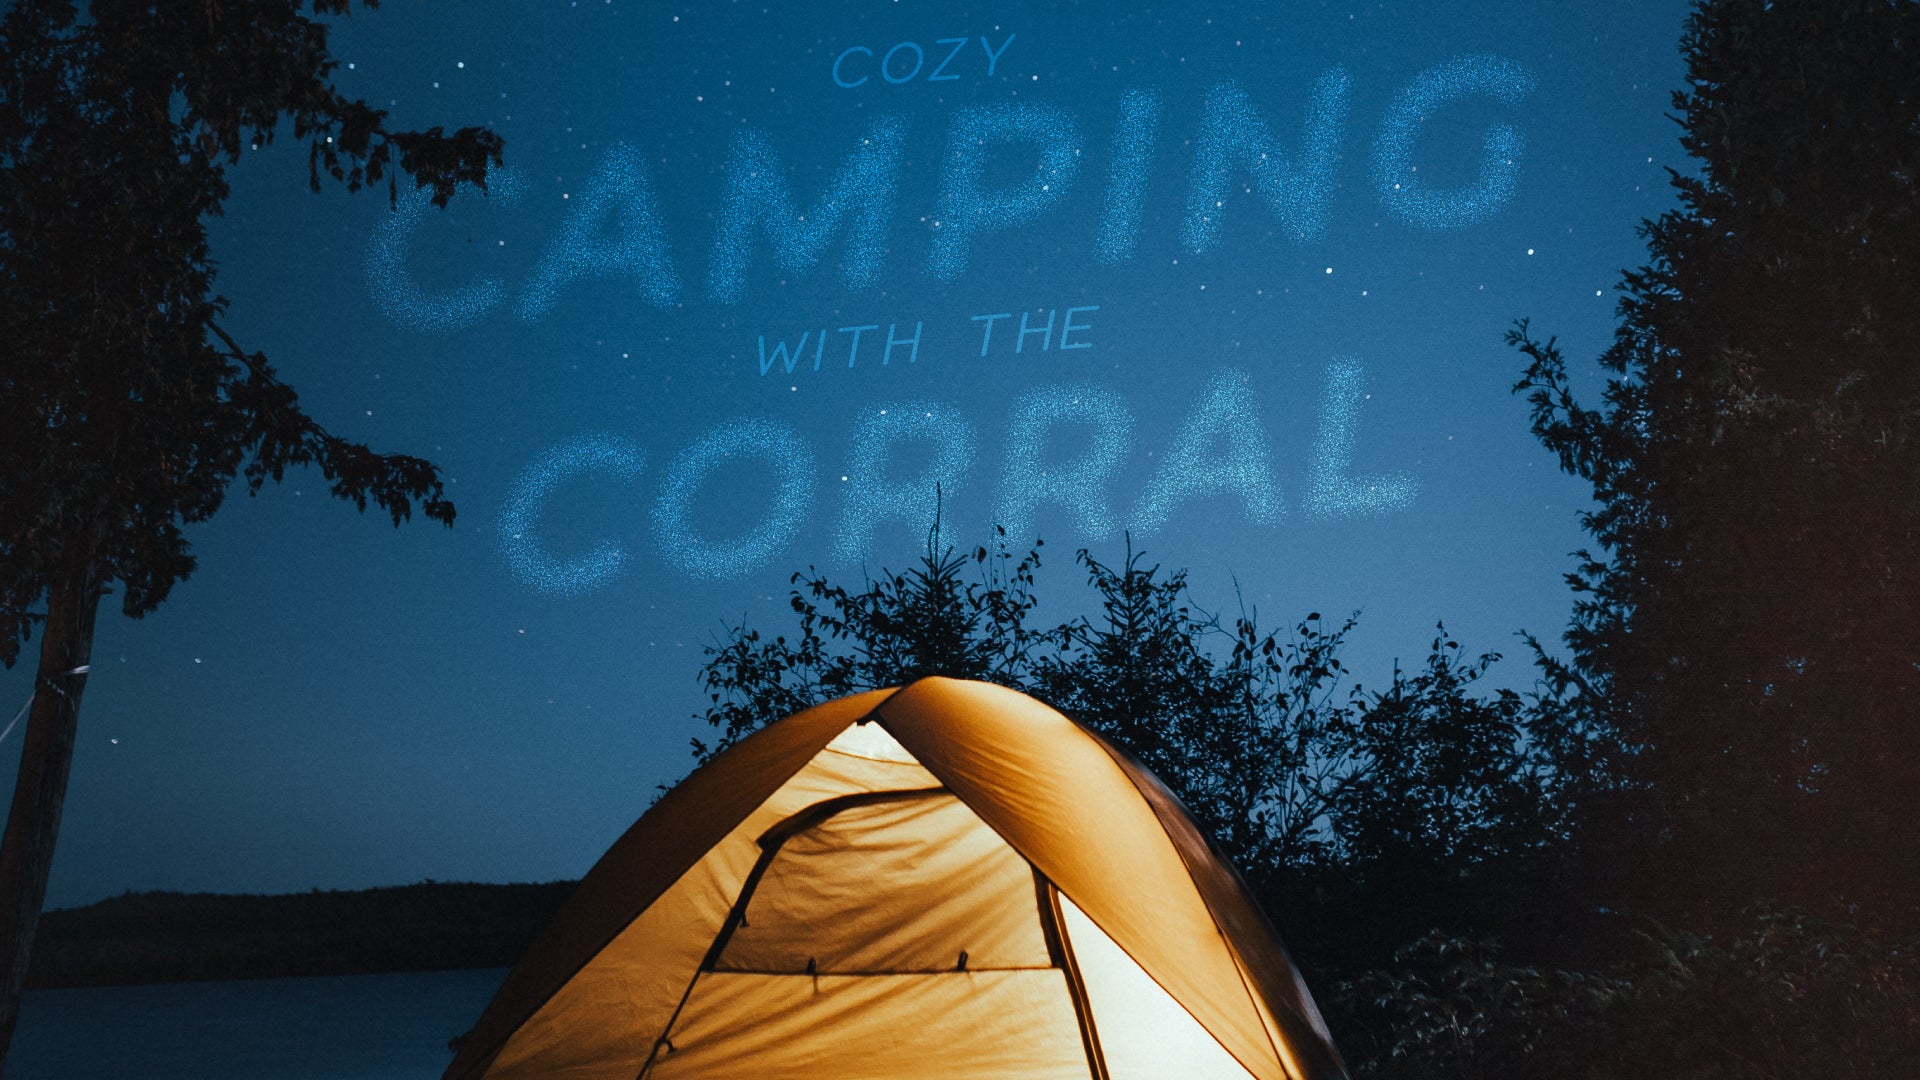 Cozy Camping with the Corral!